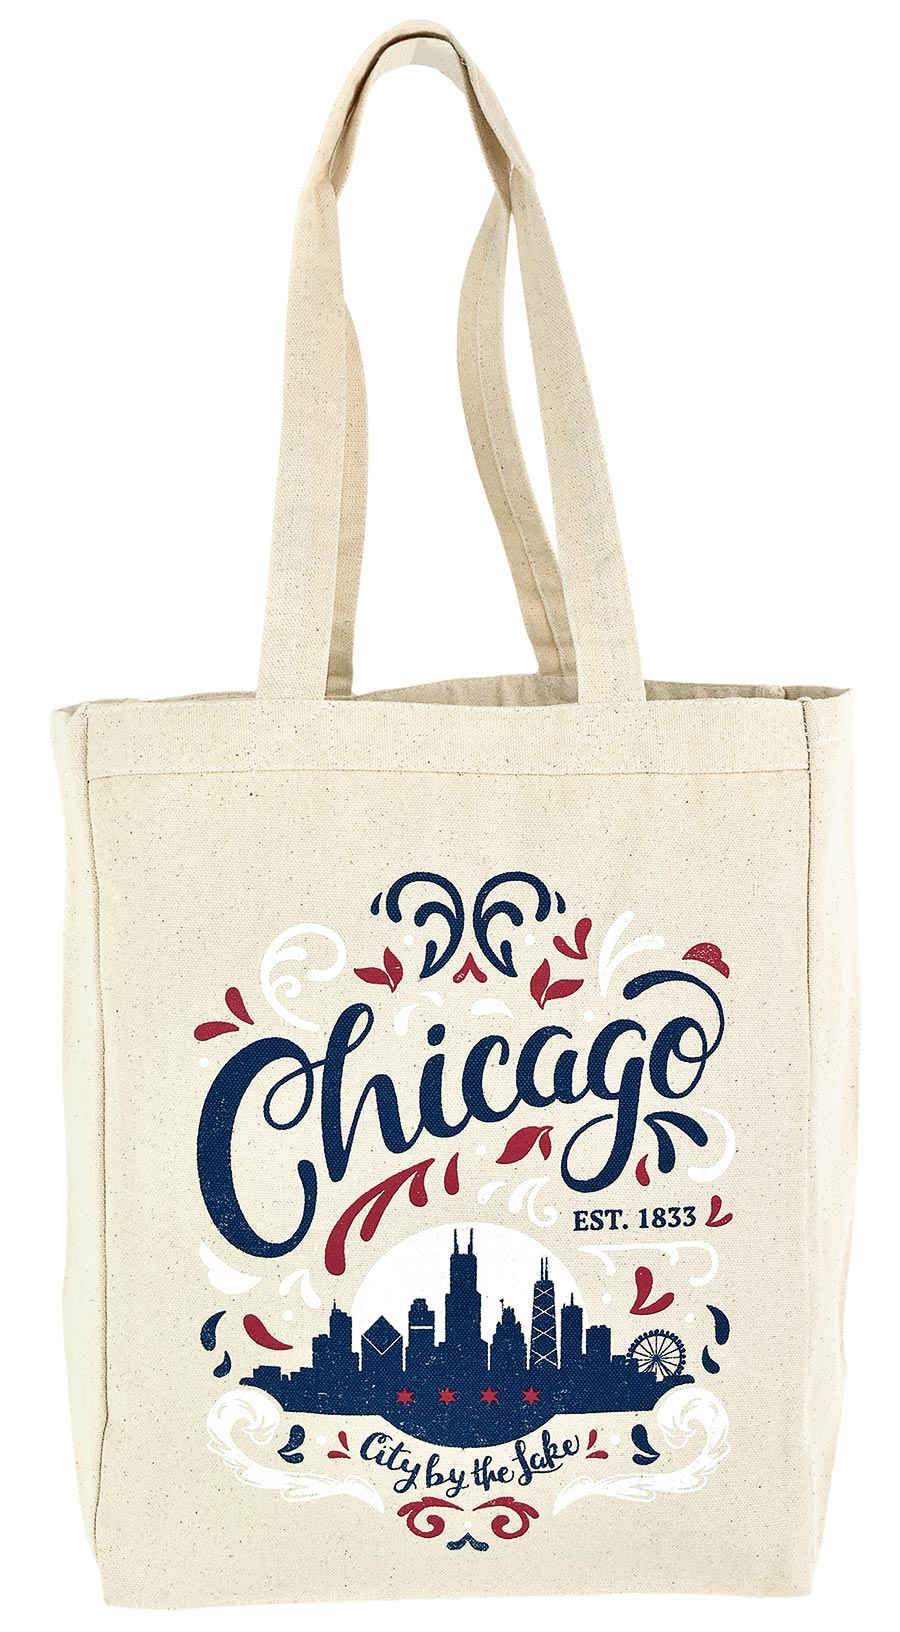 Orchard Street Apparel tote